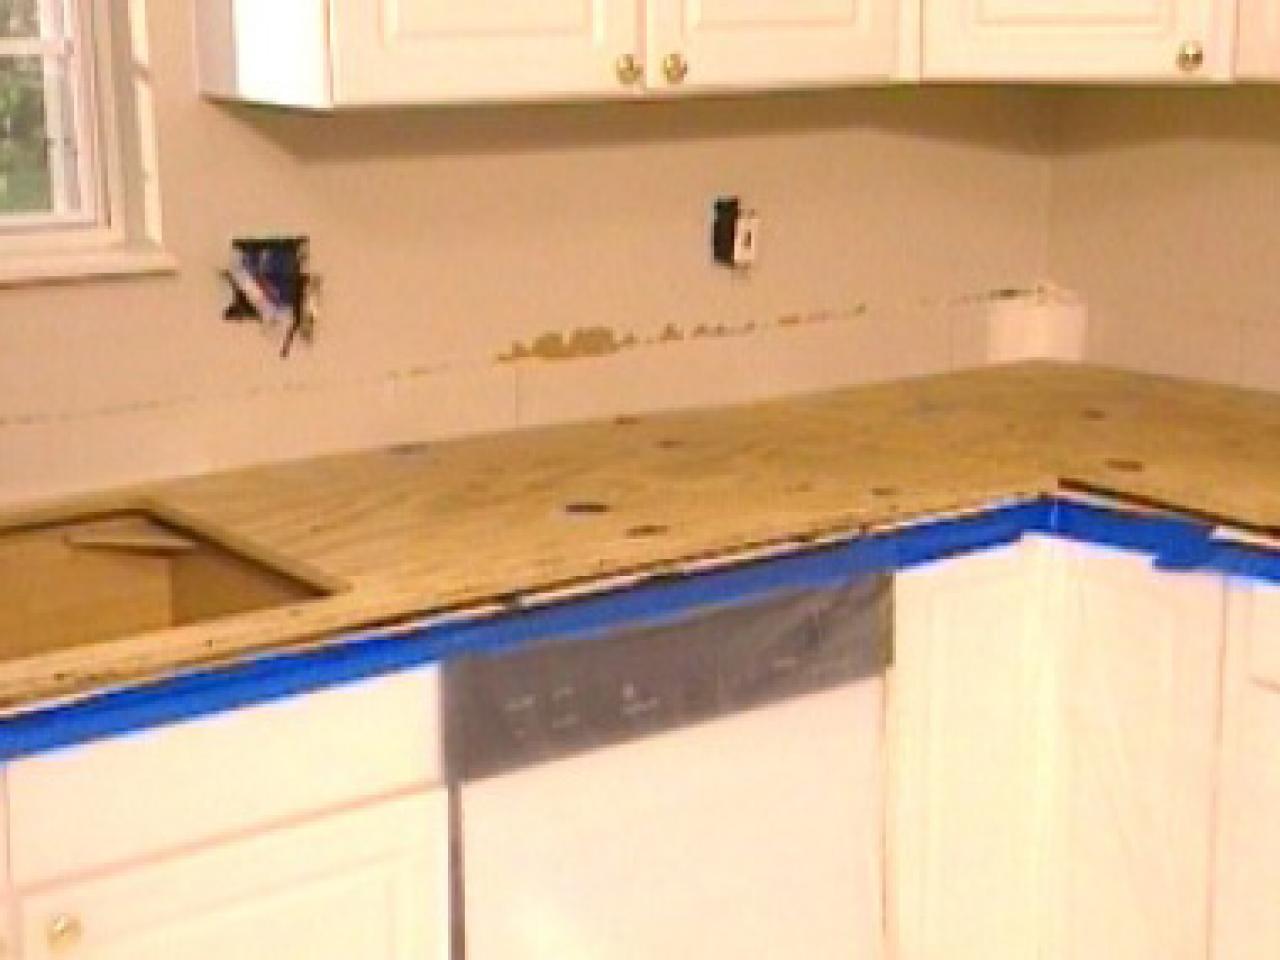 How To Demolish A Kitchen Countertop, How To Remove Tile Countertops Without Damaging Cabinets